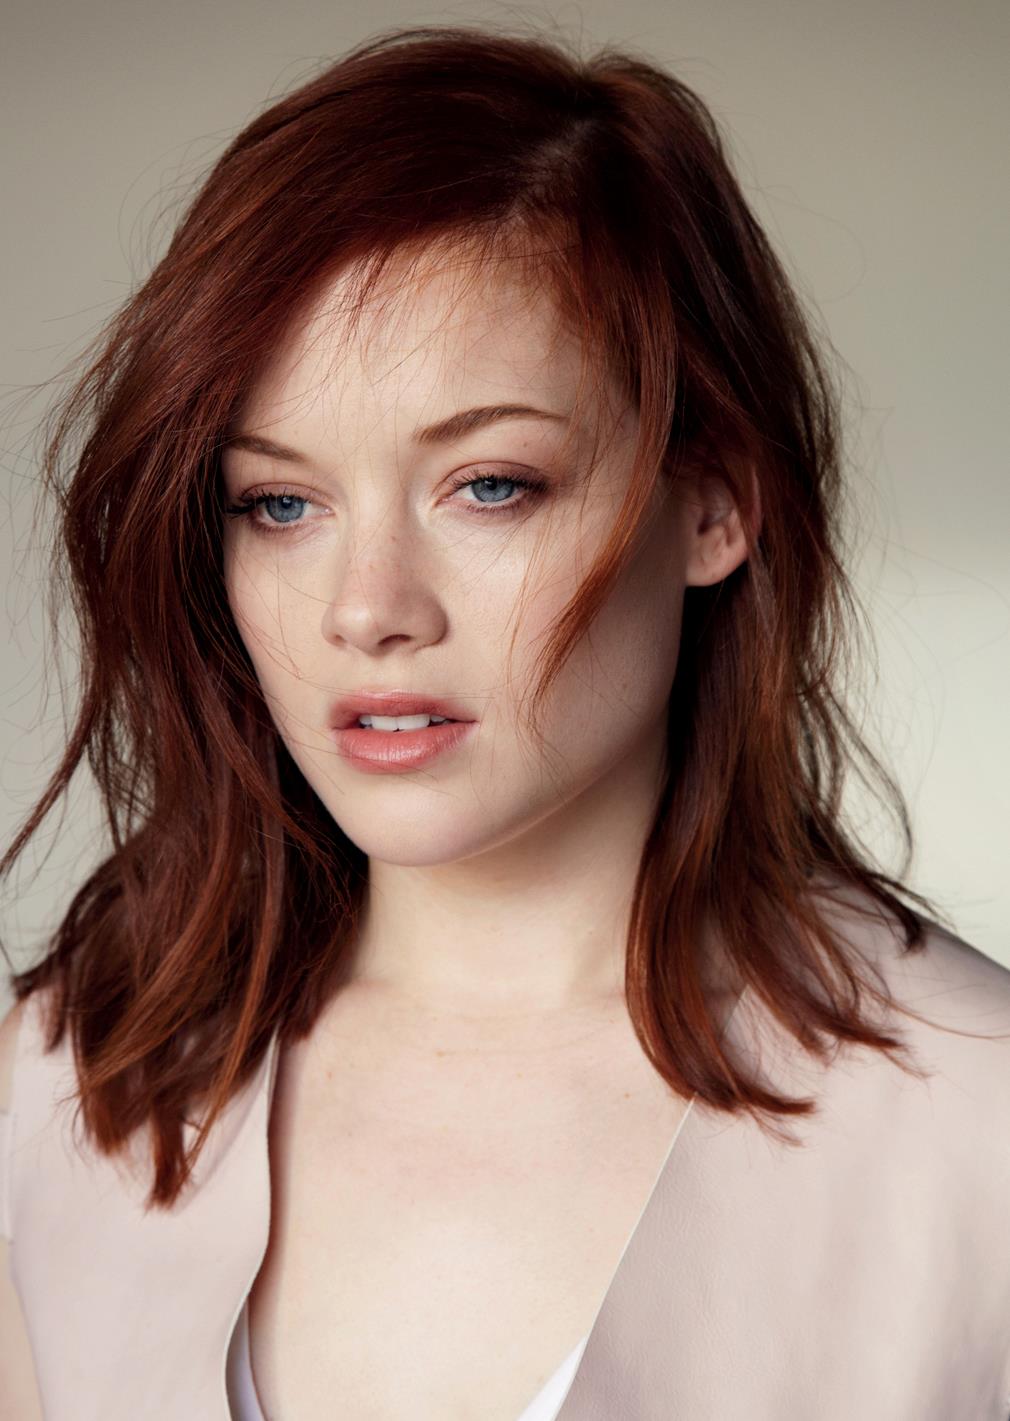 Jane levy tits